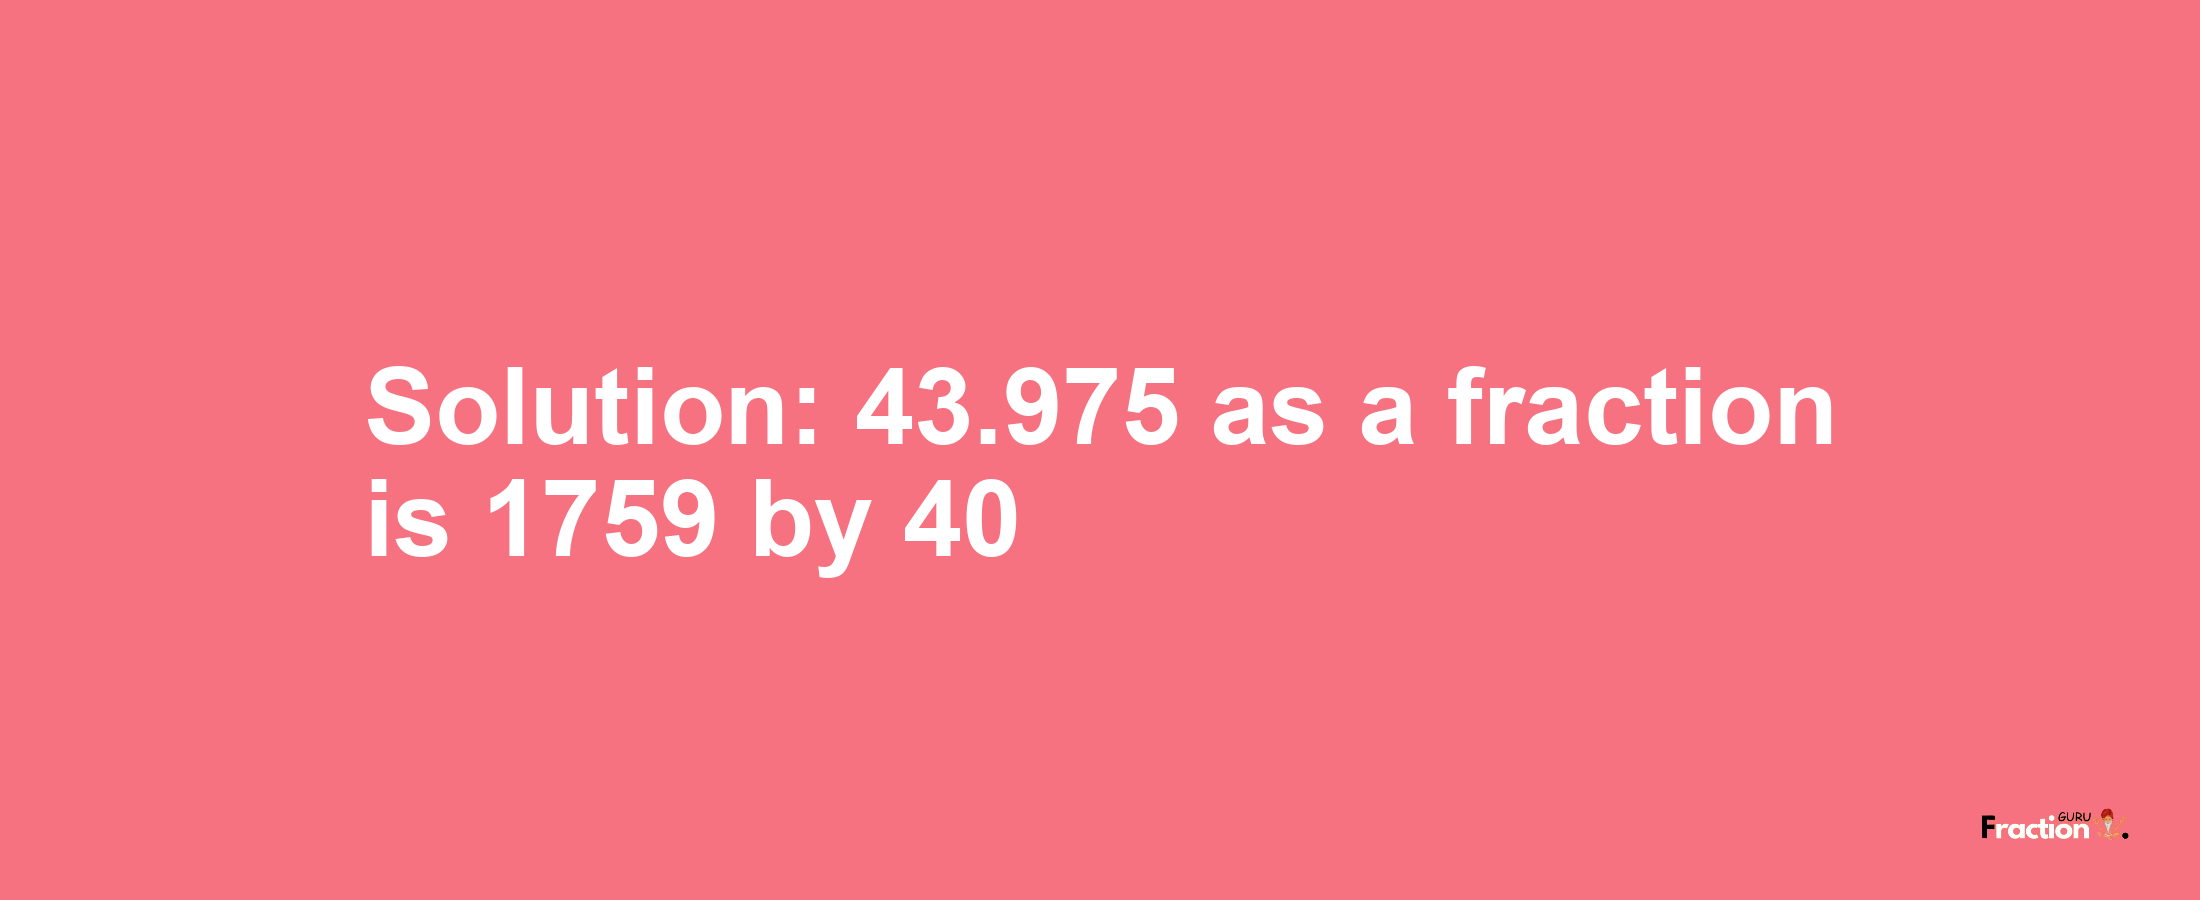 Solution:43.975 as a fraction is 1759/40